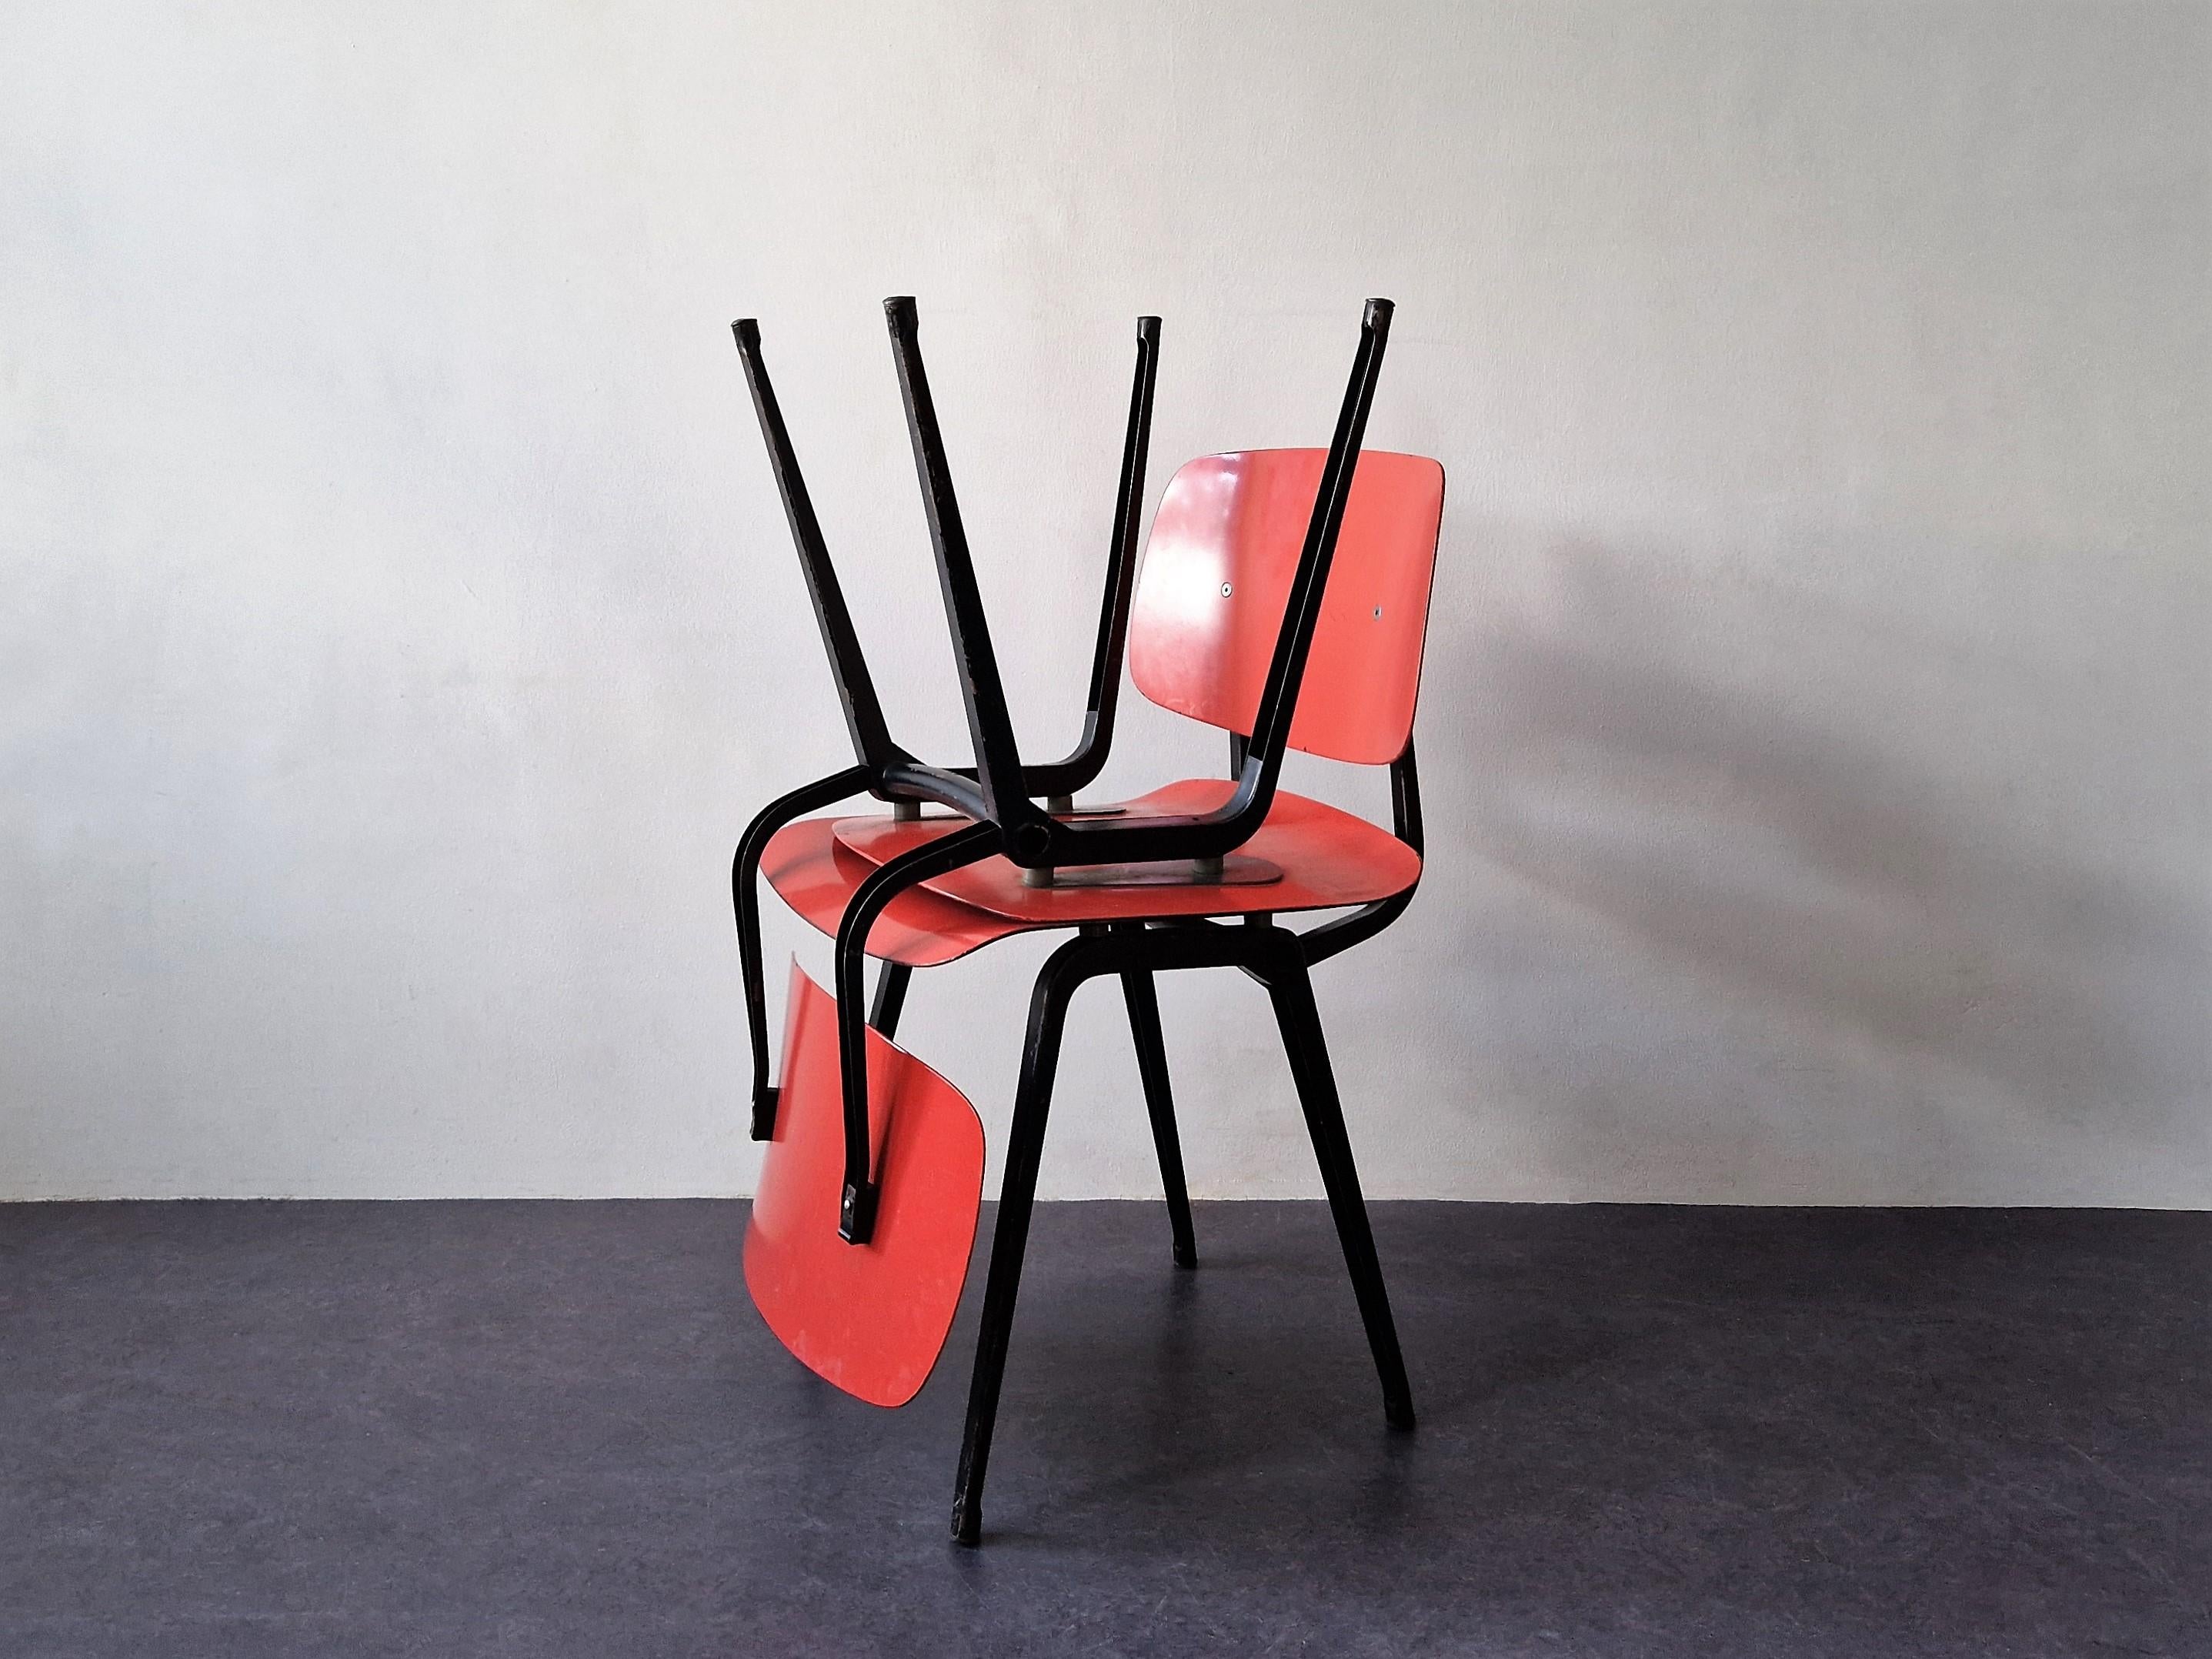 Synthetic Set of 6 Revolt Chairs by Friso Kramer for Ahrend de Cirkel, Netherlands, 1956 For Sale